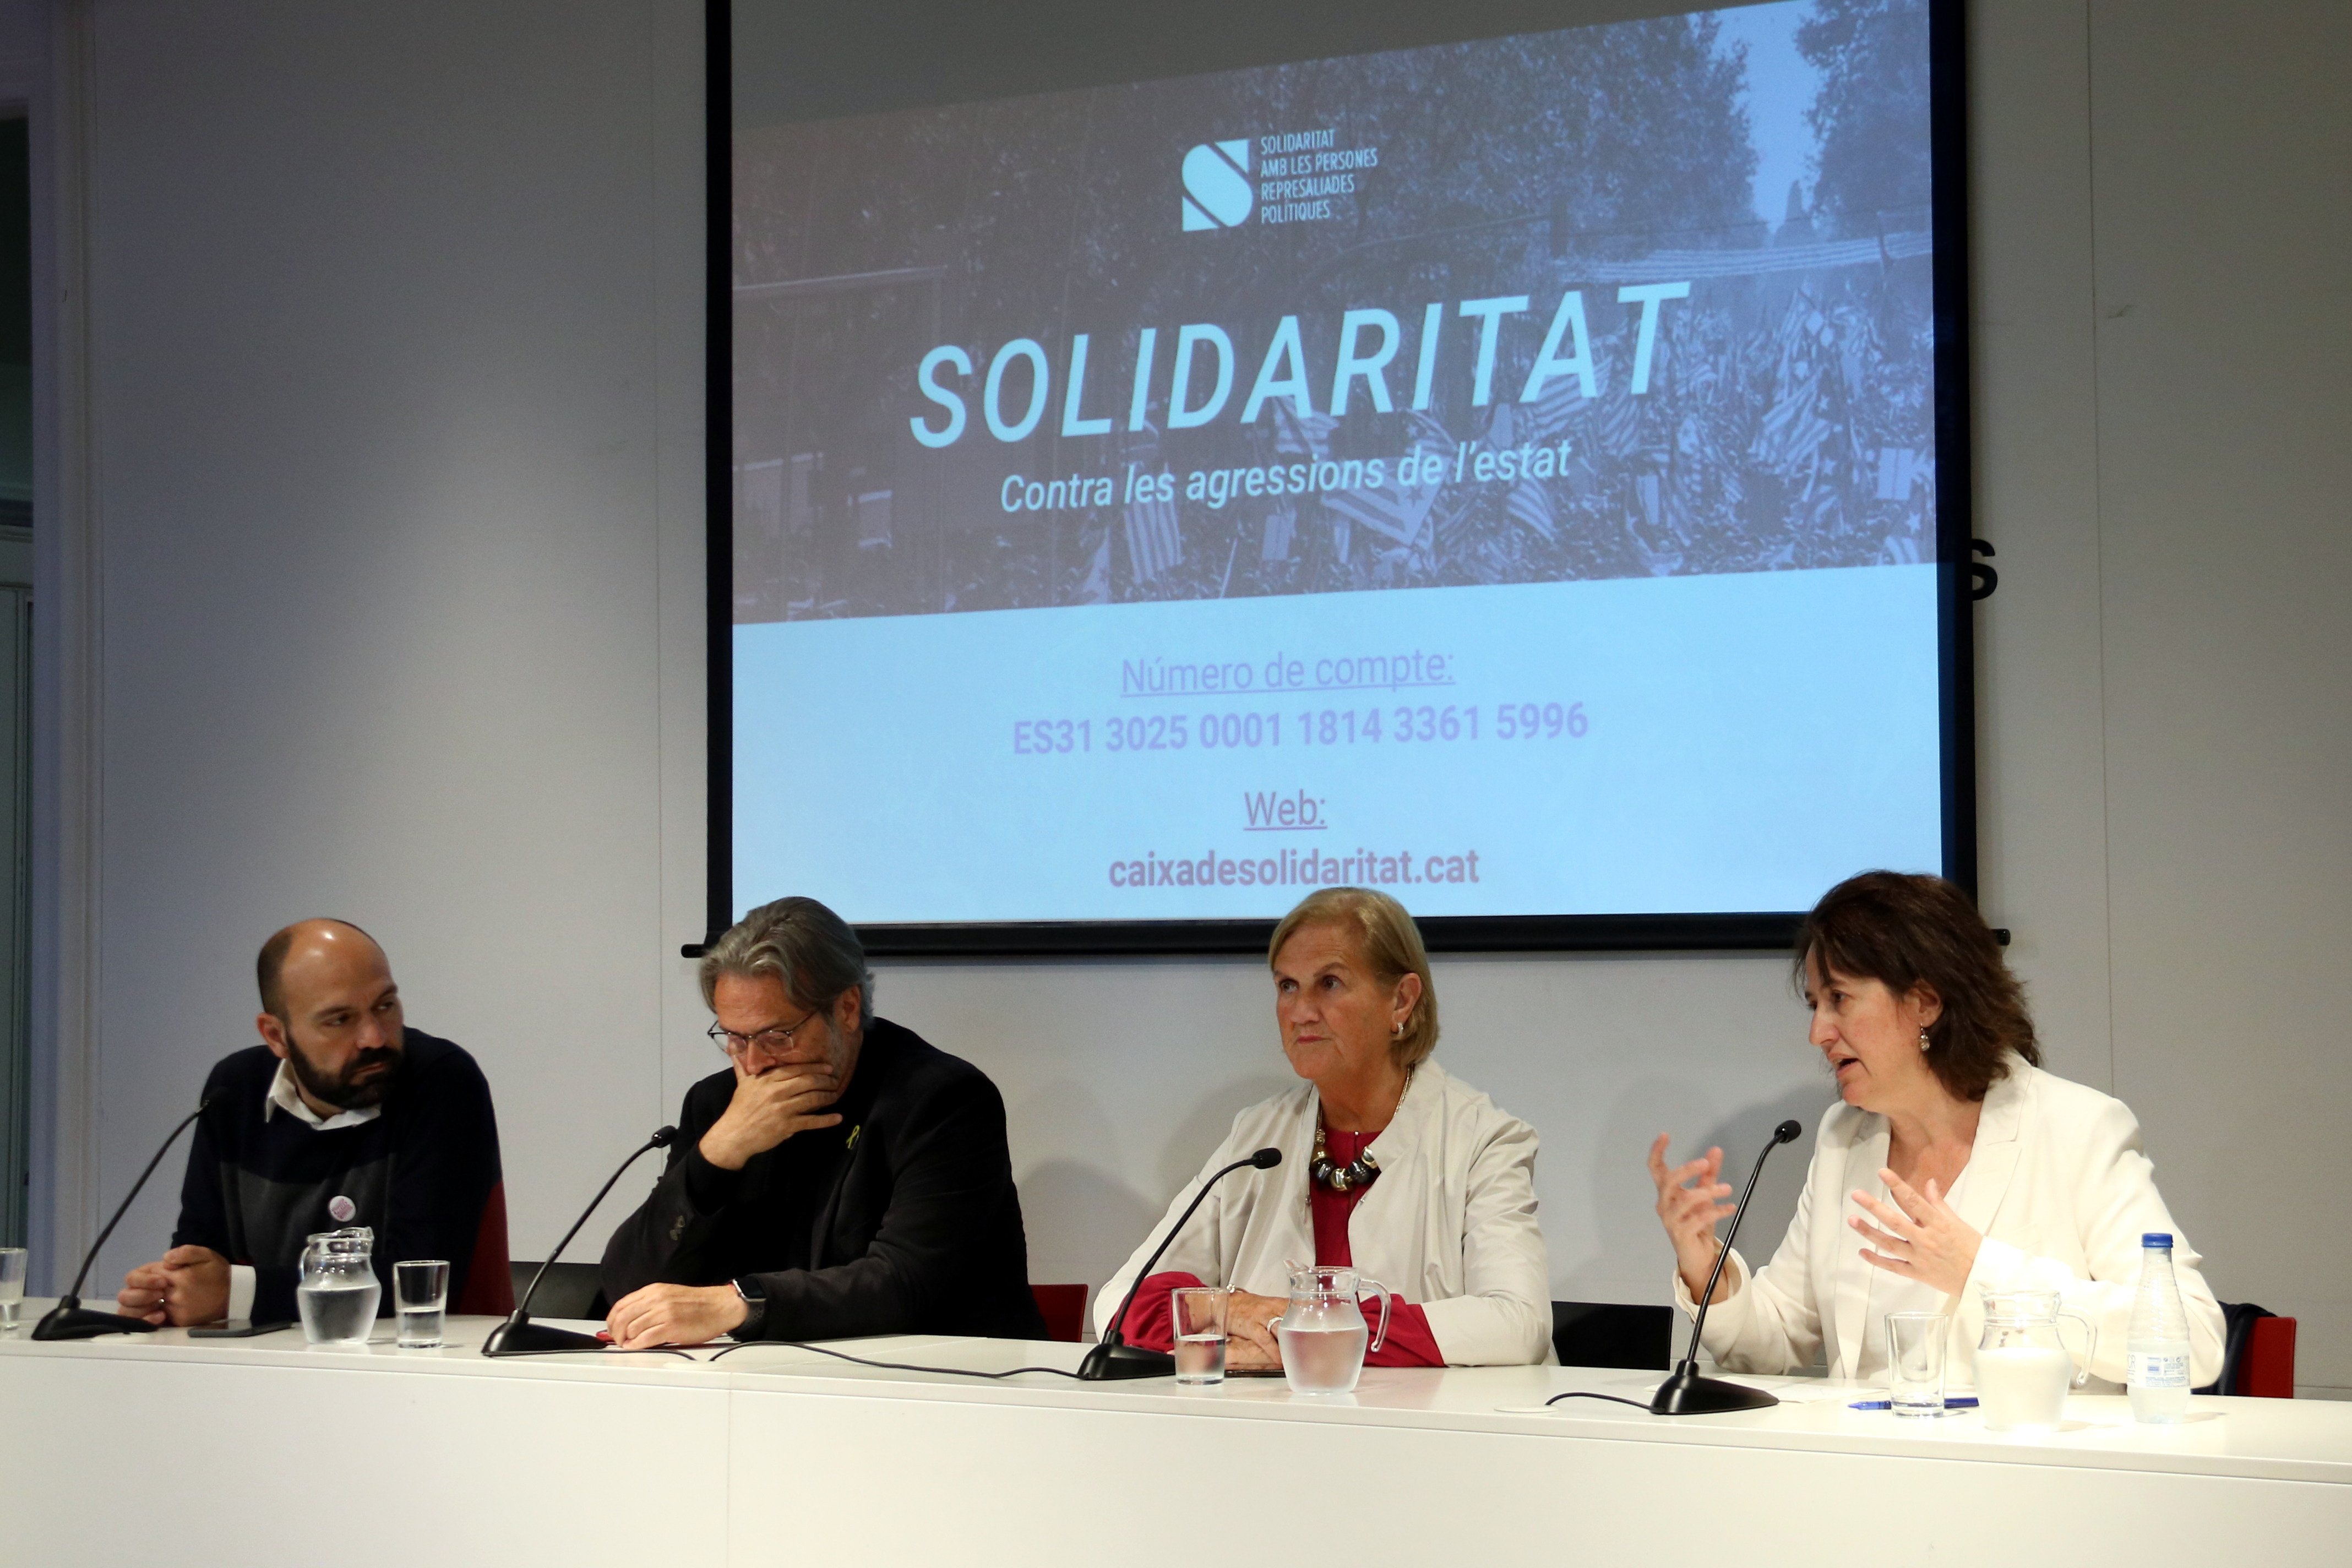 Catalonia solidarity fund appeals for 700,000 euros to avoid property seizures